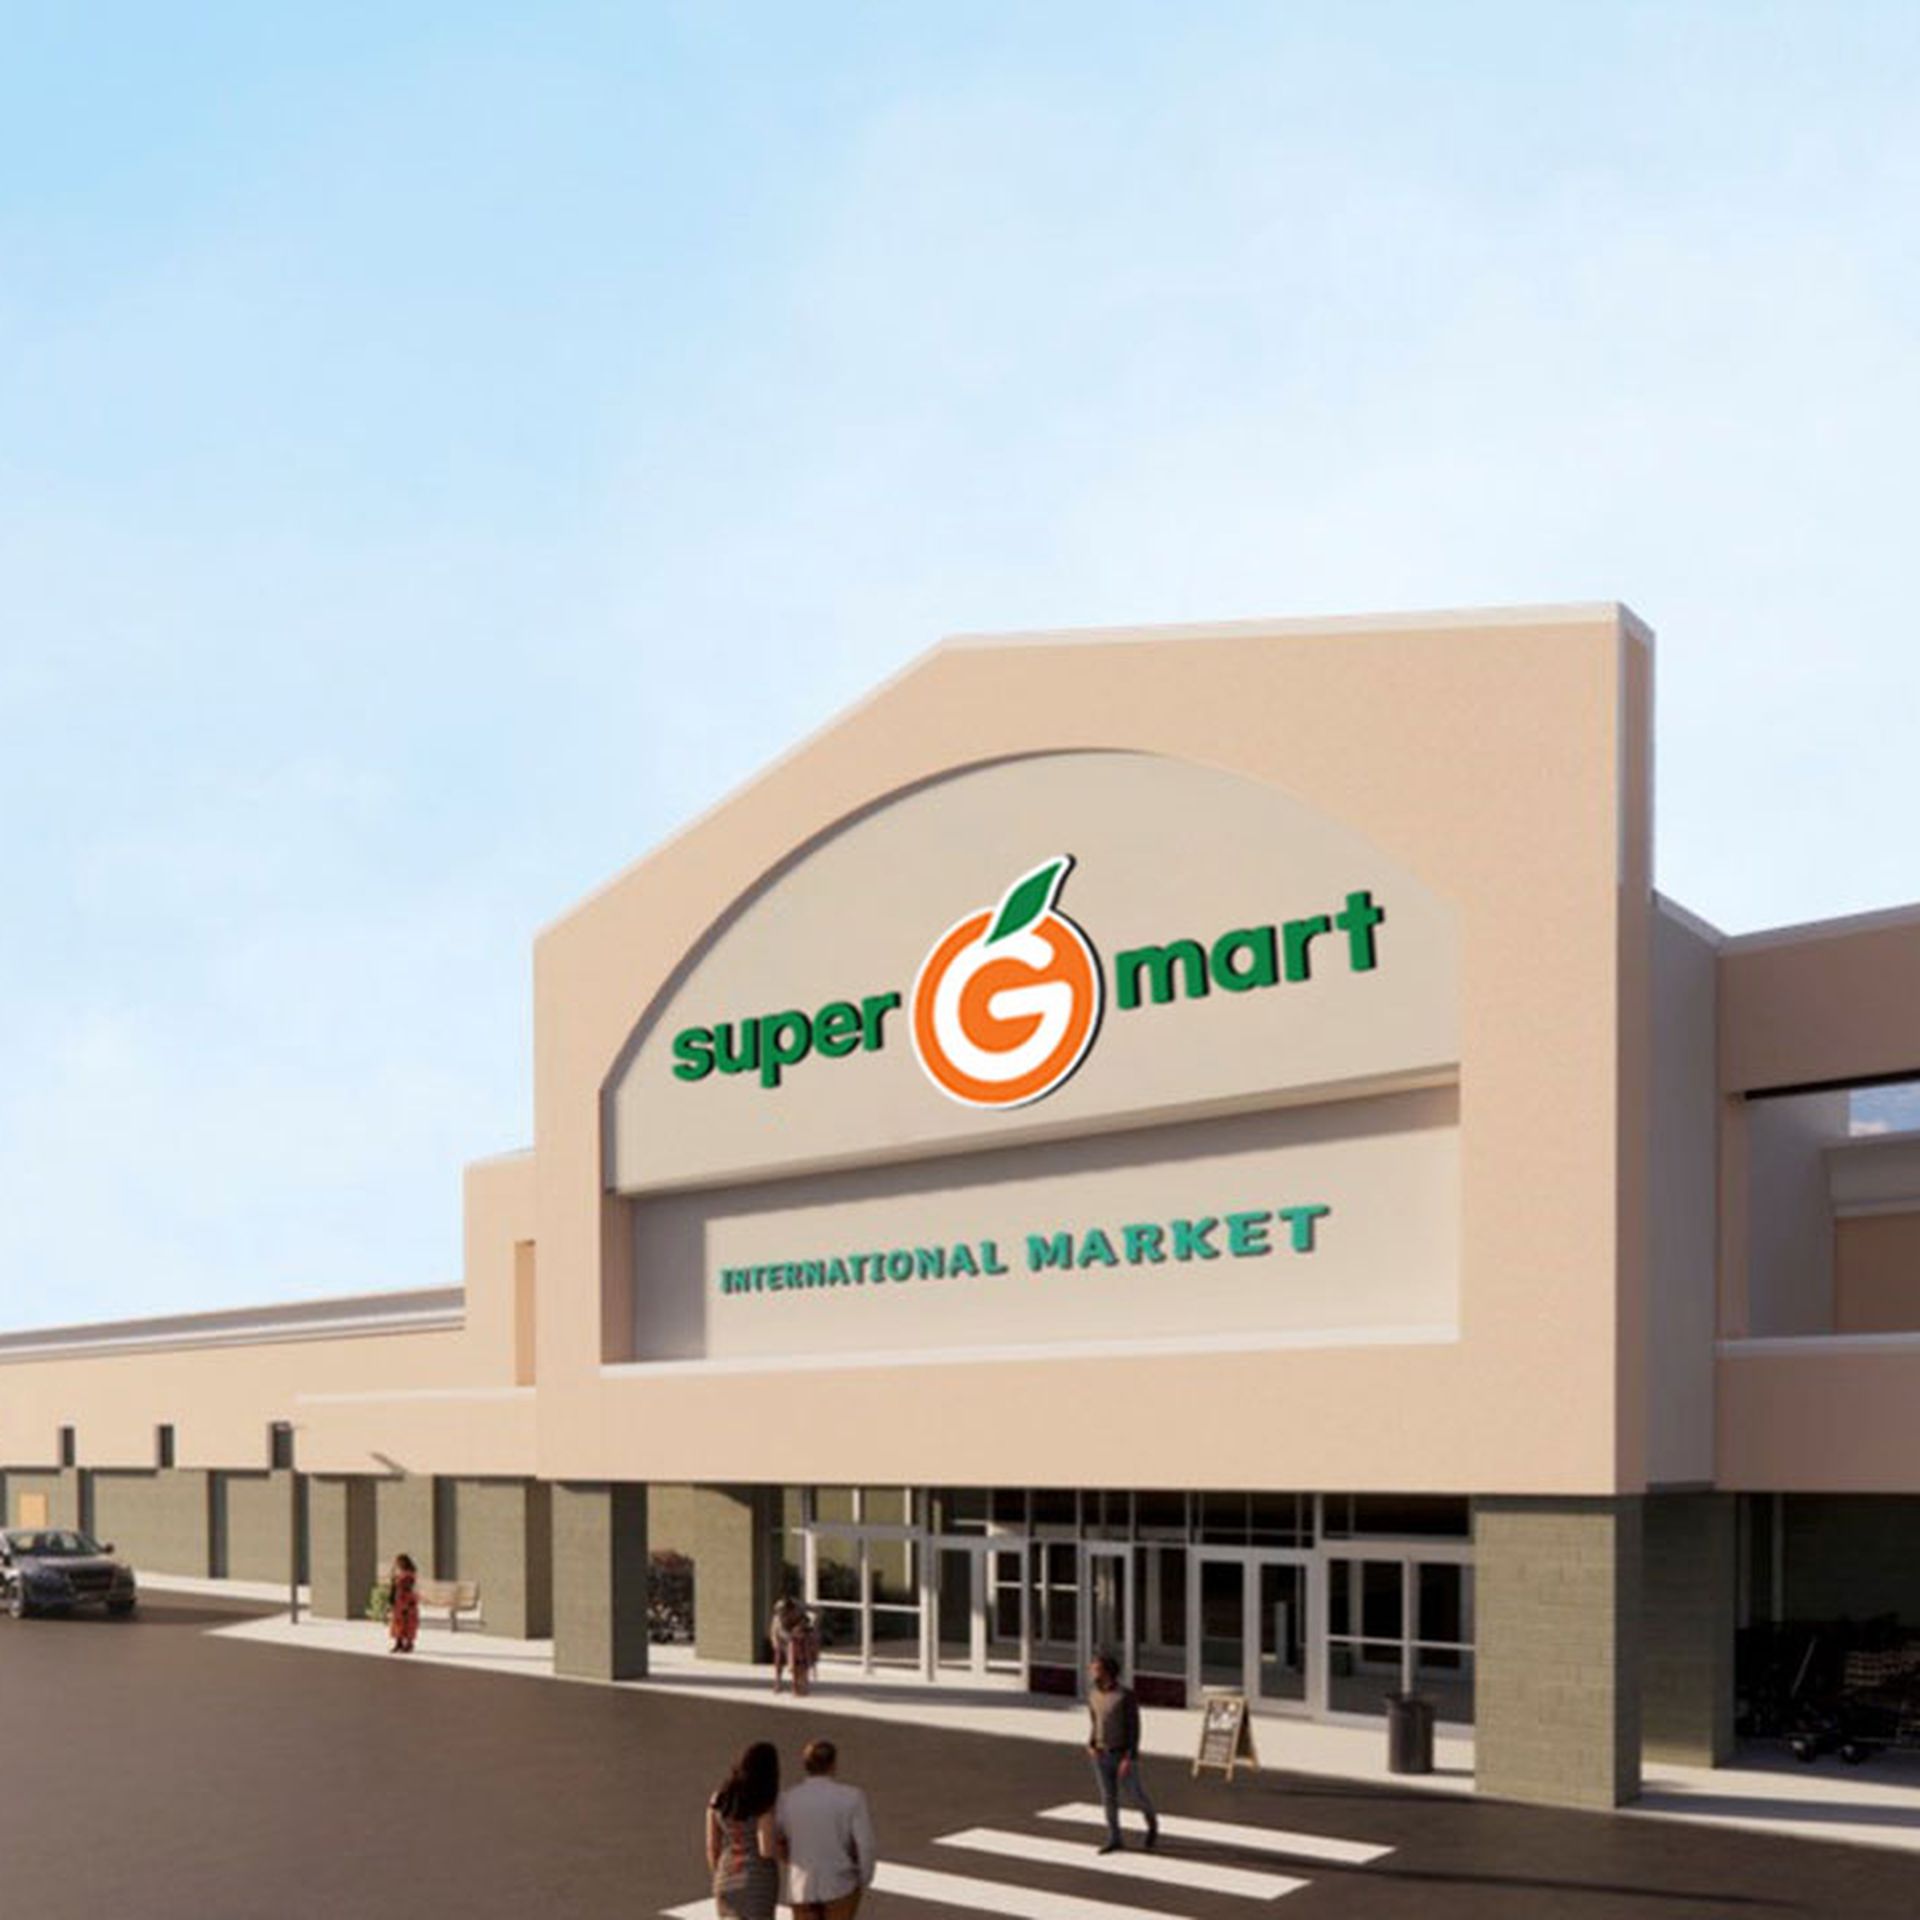 strip mall storefront with Super G Mart on sign